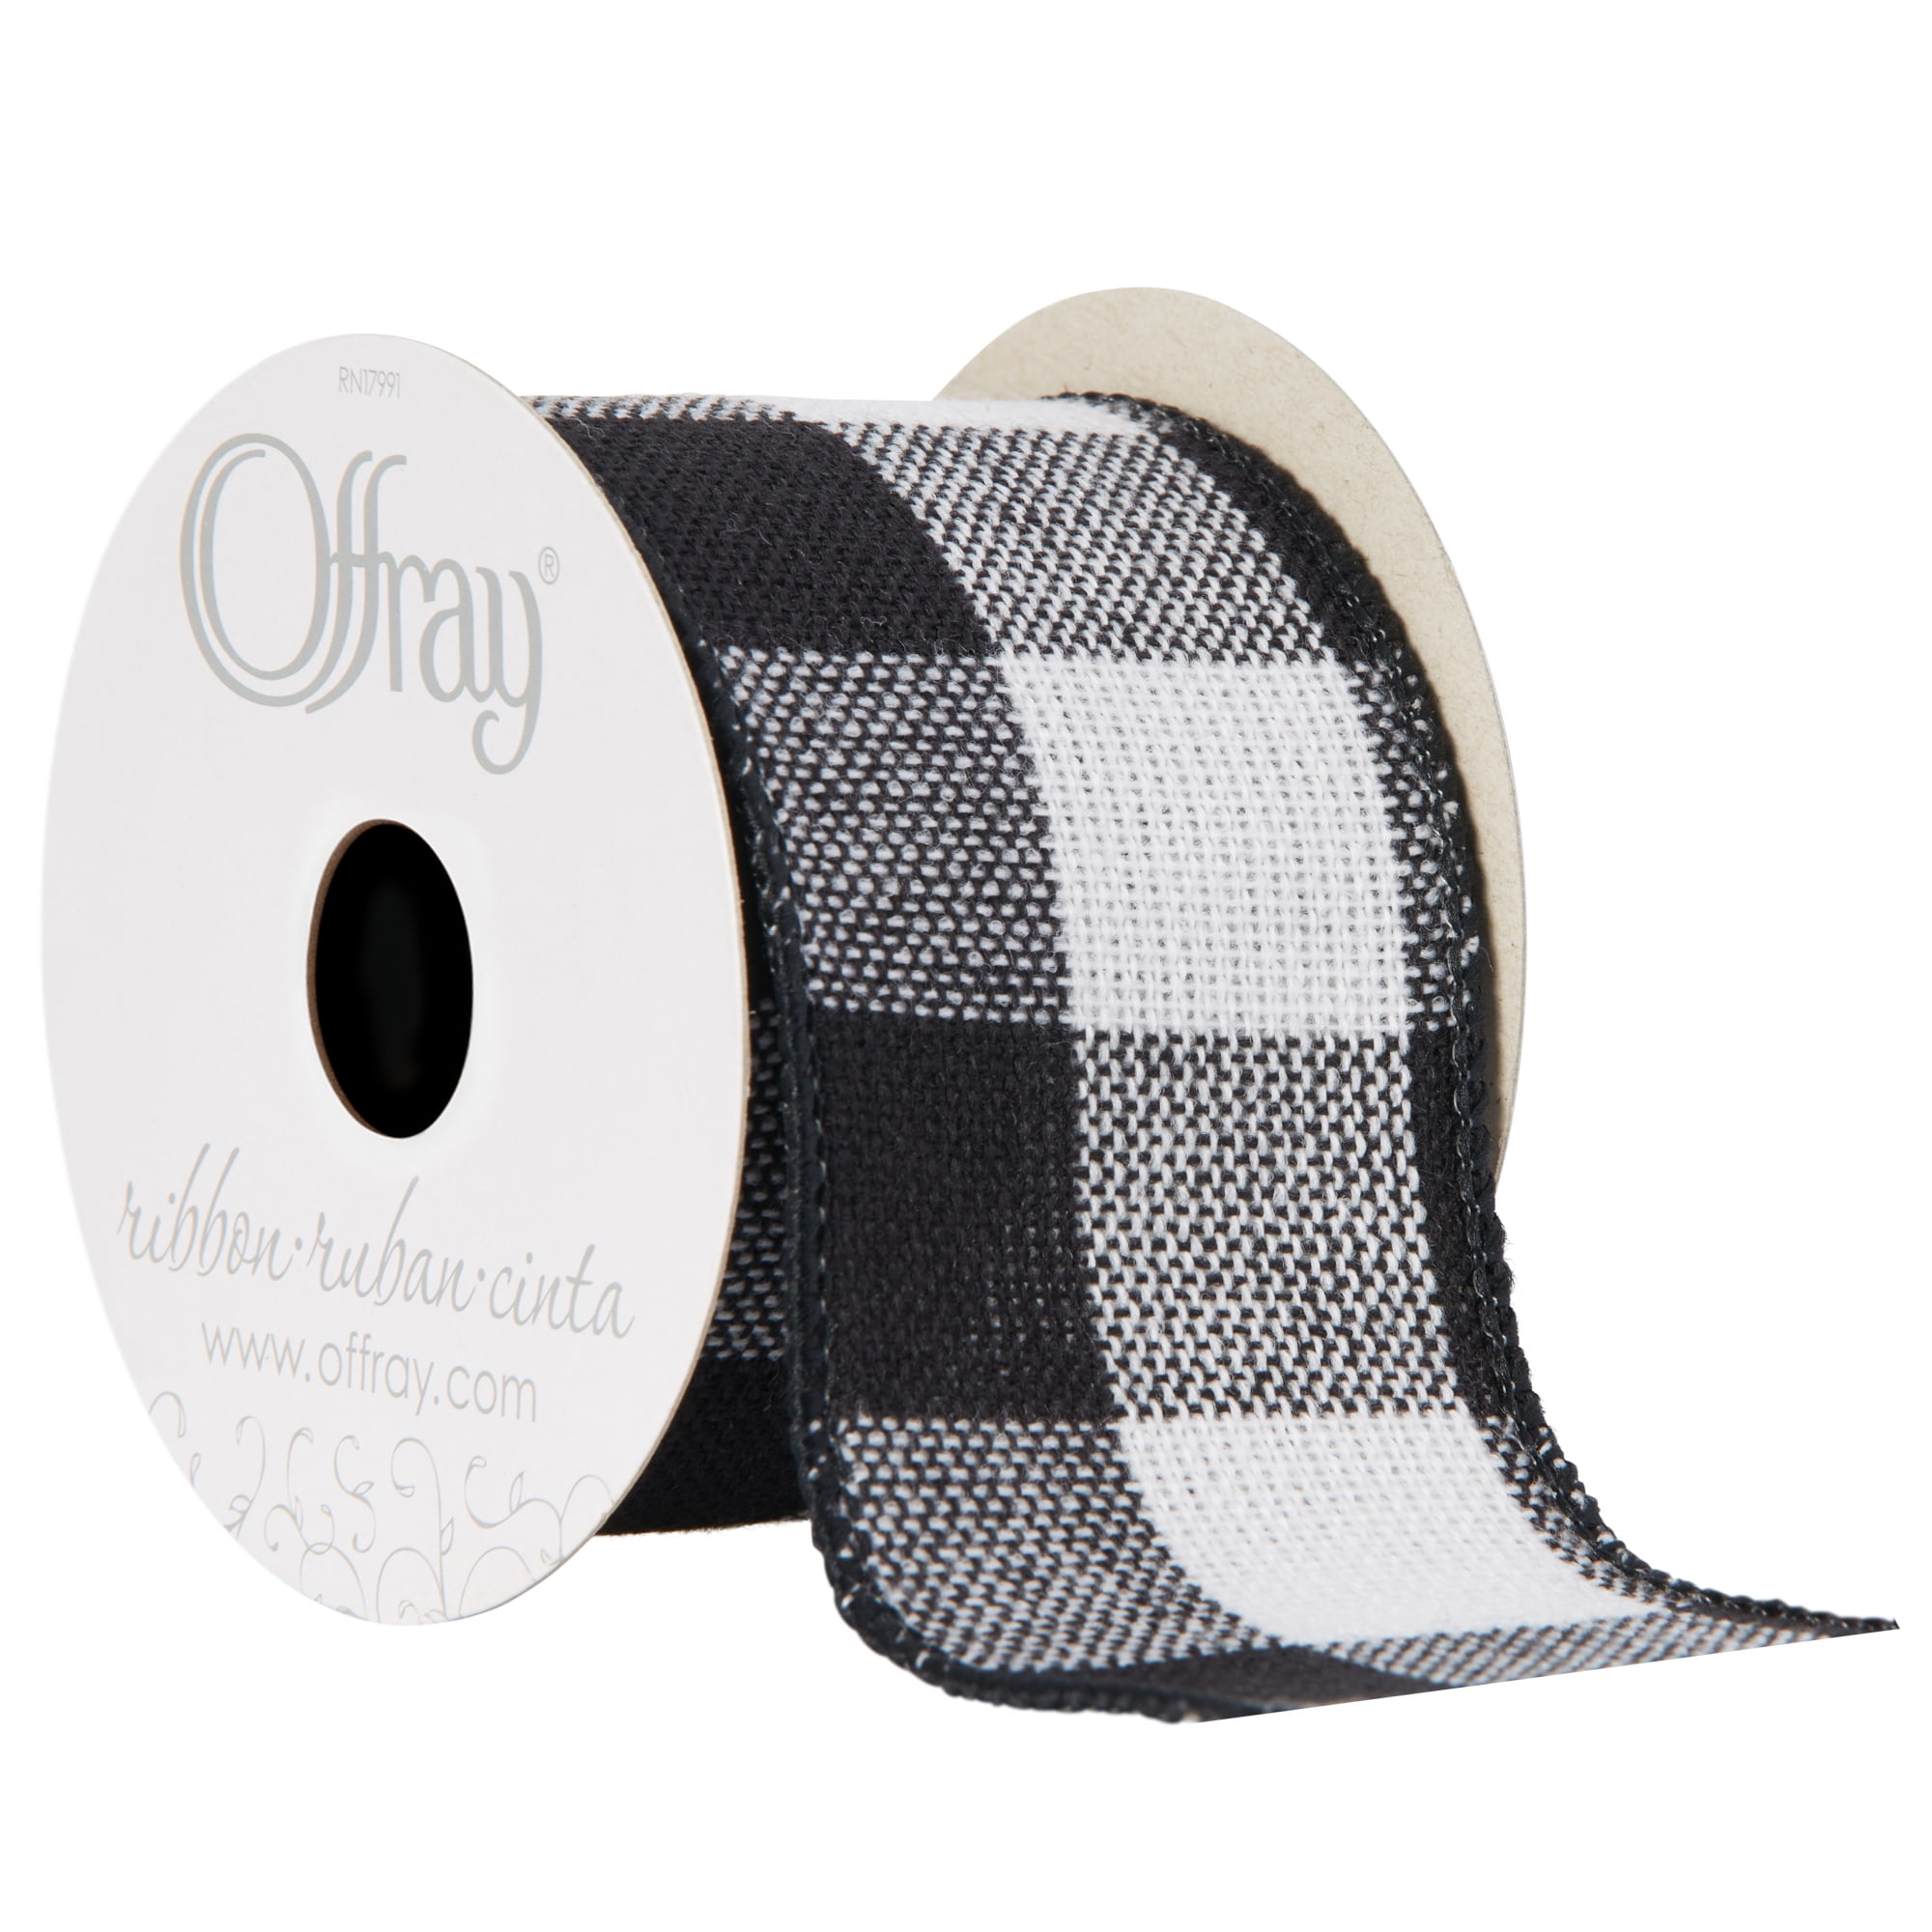 Offray Ribbon, White and Black Buffalo Check 2 1/2 inch Wired Edge Woven Ribbon for Crafts, Gifting, and Wedding, 9 feet, 1 Each